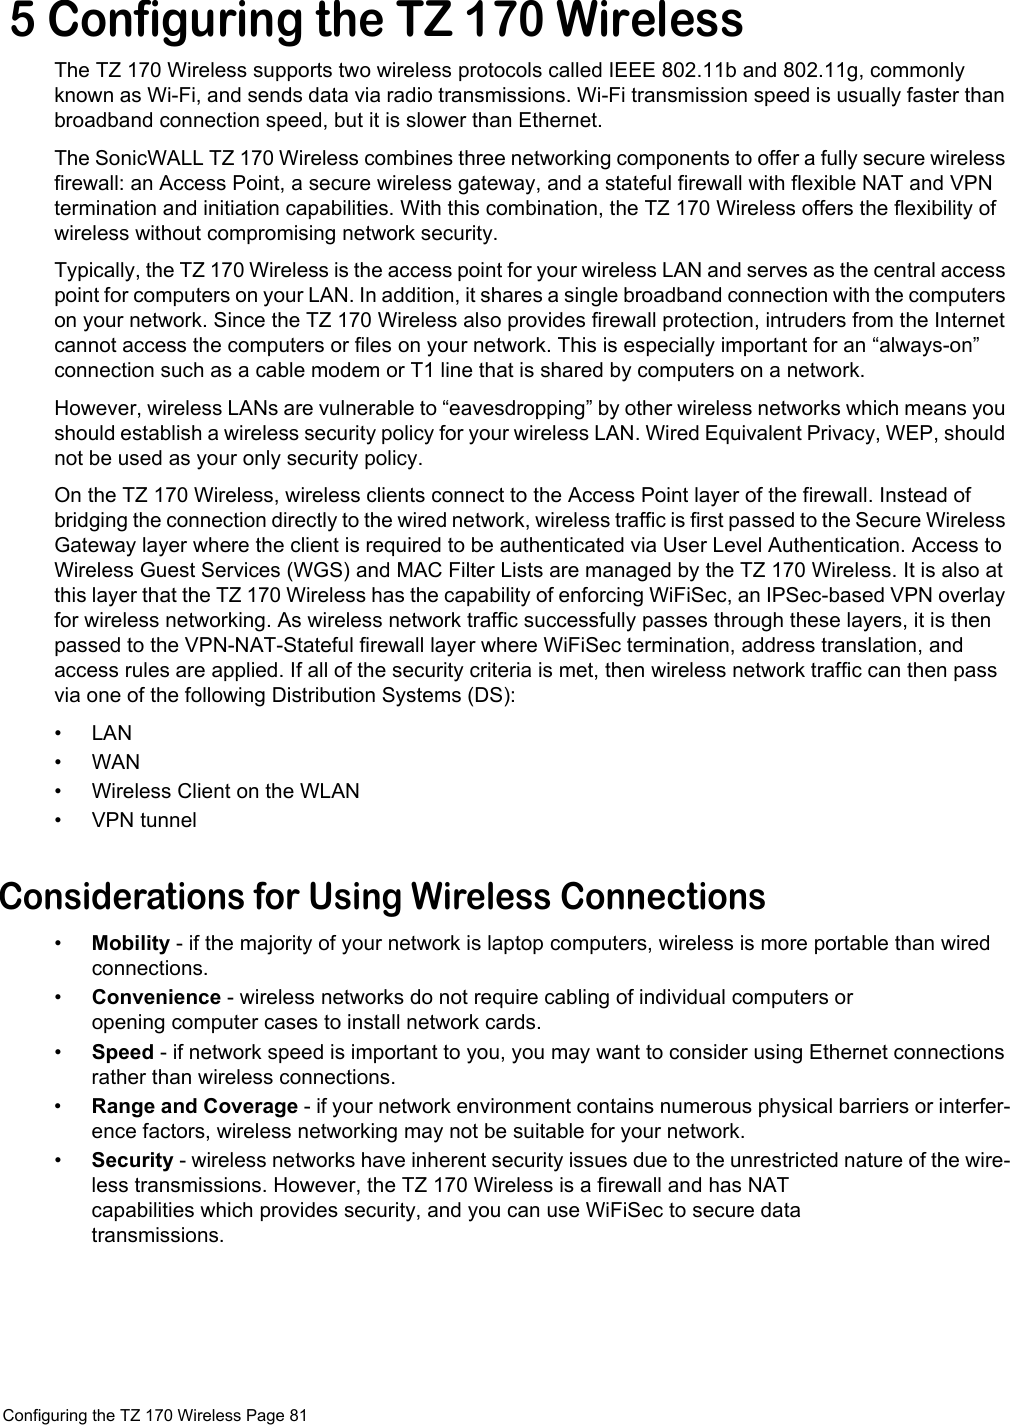  Configuring the TZ 170 Wireless Page 81  5 Configuring the TZ 170 WirelessThe TZ 170 Wireless supports two wireless protocols called IEEE 802.11b and 802.11g, commonly known as Wi-Fi, and sends data via radio transmissions. Wi-Fi transmission speed is usually faster than broadband connection speed, but it is slower than Ethernet.The SonicWALL TZ 170 Wireless combines three networking components to offer a fully secure wireless firewall: an Access Point, a secure wireless gateway, and a stateful firewall with flexible NAT and VPN termination and initiation capabilities. With this combination, the TZ 170 Wireless offers the flexibility of wireless without compromising network security. Typically, the TZ 170 Wireless is the access point for your wireless LAN and serves as the central access point for computers on your LAN. In addition, it shares a single broadband connection with the computers on your network. Since the TZ 170 Wireless also provides firewall protection, intruders from the Internet cannot access the computers or files on your network. This is especially important for an “always-on” connection such as a cable modem or T1 line that is shared by computers on a network.However, wireless LANs are vulnerable to “eavesdropping” by other wireless networks which means you should establish a wireless security policy for your wireless LAN. Wired Equivalent Privacy, WEP, should not be used as your only security policy. On the TZ 170 Wireless, wireless clients connect to the Access Point layer of the firewall. Instead of bridging the connection directly to the wired network, wireless traffic is first passed to the Secure Wireless Gateway layer where the client is required to be authenticated via User Level Authentication. Access to Wireless Guest Services (WGS) and MAC Filter Lists are managed by the TZ 170 Wireless. It is also at this layer that the TZ 170 Wireless has the capability of enforcing WiFiSec, an IPSec-based VPN overlay for wireless networking. As wireless network traffic successfully passes through these layers, it is then passed to the VPN-NAT-Stateful firewall layer where WiFiSec termination, address translation, and access rules are applied. If all of the security criteria is met, then wireless network traffic can then pass via one of the following Distribution Systems (DS):•LAN•WAN• Wireless Client on the WLAN• VPN tunnelConsiderations for Using Wireless Connections•Mobility - if the majority of your network is laptop computers, wireless is more portable than wired connections.•Convenience - wireless networks do not require cabling of individual computers or opening computer cases to install network cards.•Speed - if network speed is important to you, you may want to consider using Ethernet connections rather than wireless connections. •Range and Coverage - if your network environment contains numerous physical barriers or interfer-ence factors, wireless networking may not be suitable for your network.•Security - wireless networks have inherent security issues due to the unrestricted nature of the wire-less transmissions. However, the TZ 170 Wireless is a firewall and has NAT capabilities which provides security, and you can use WiFiSec to secure data transmissions.